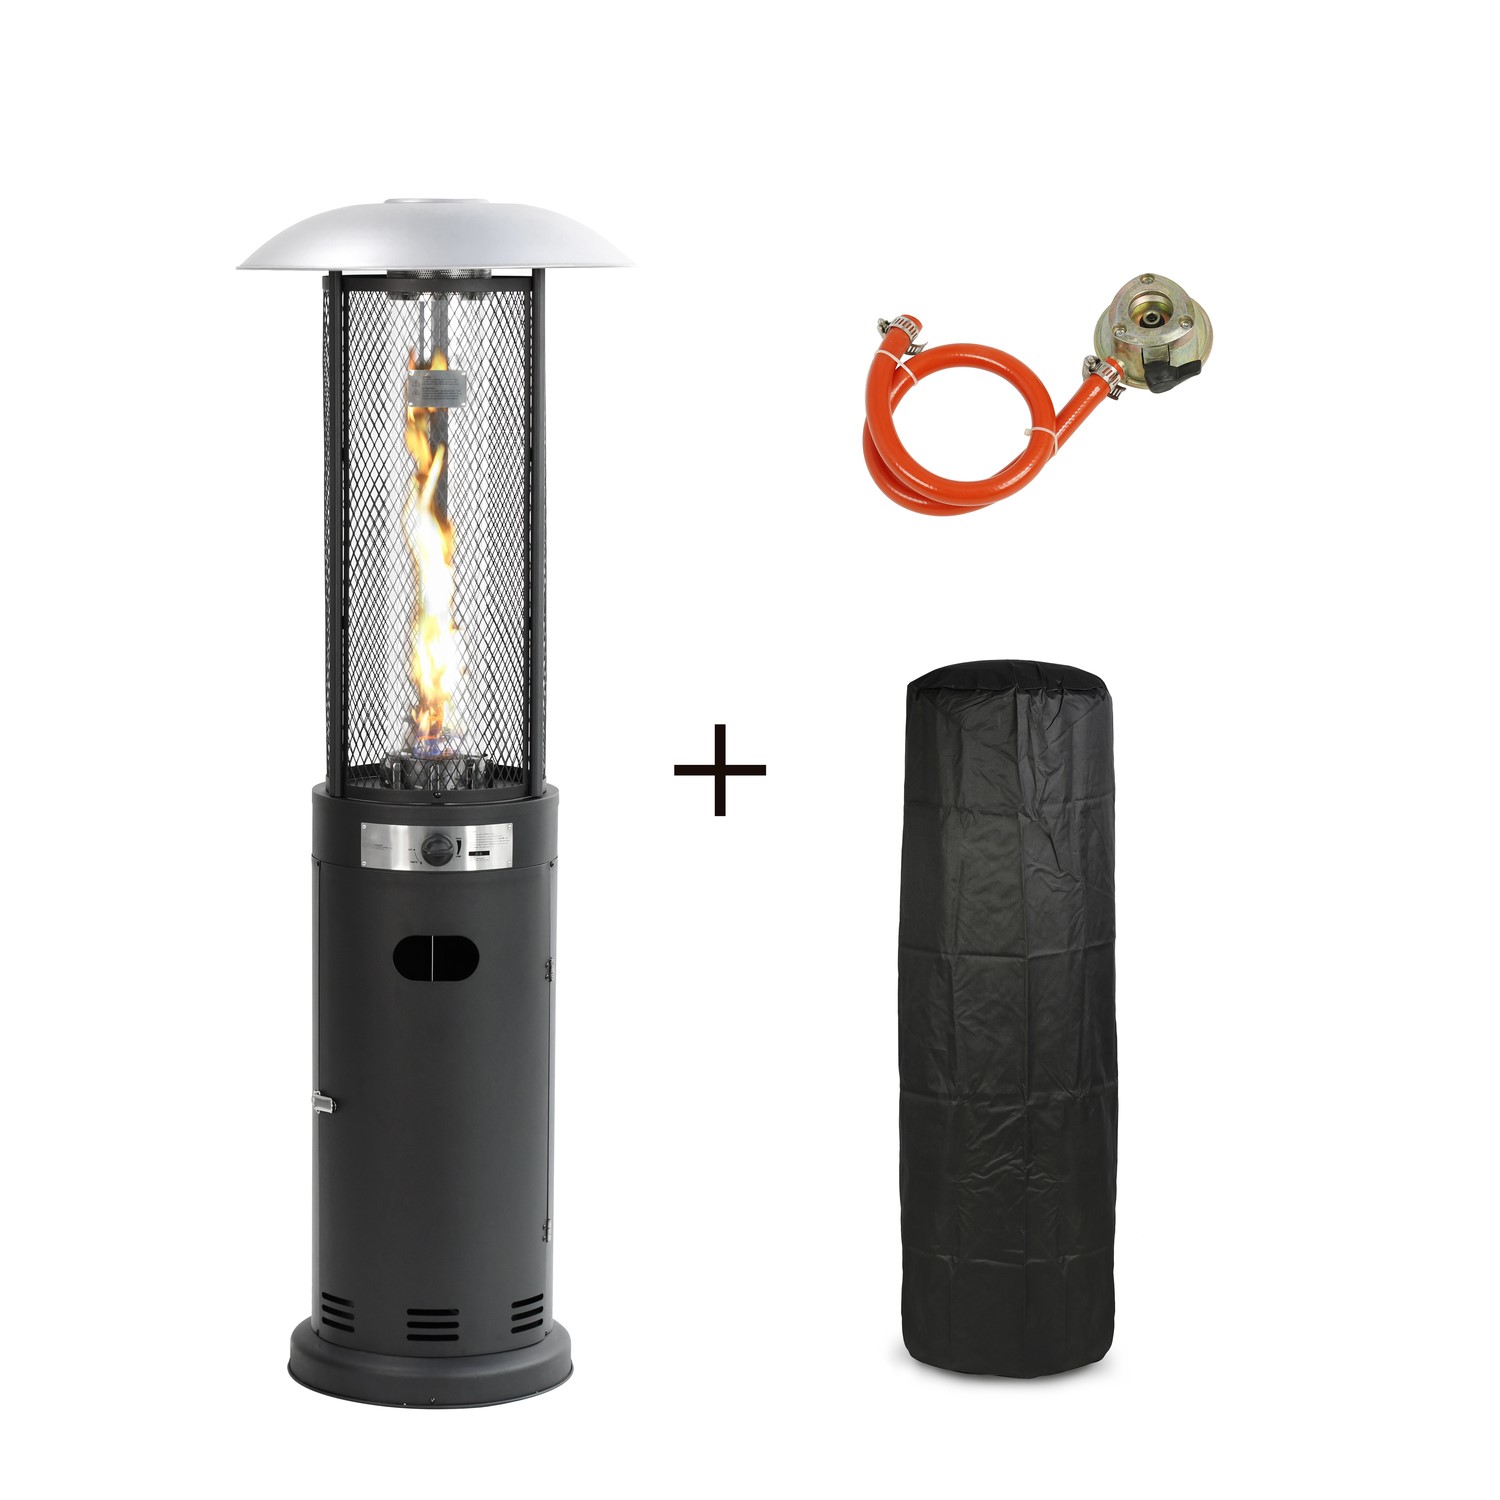 Refurbished electriQ eiQODGRBL Outdoor Freestanding Gas Patio Heater In Black with Free Cover